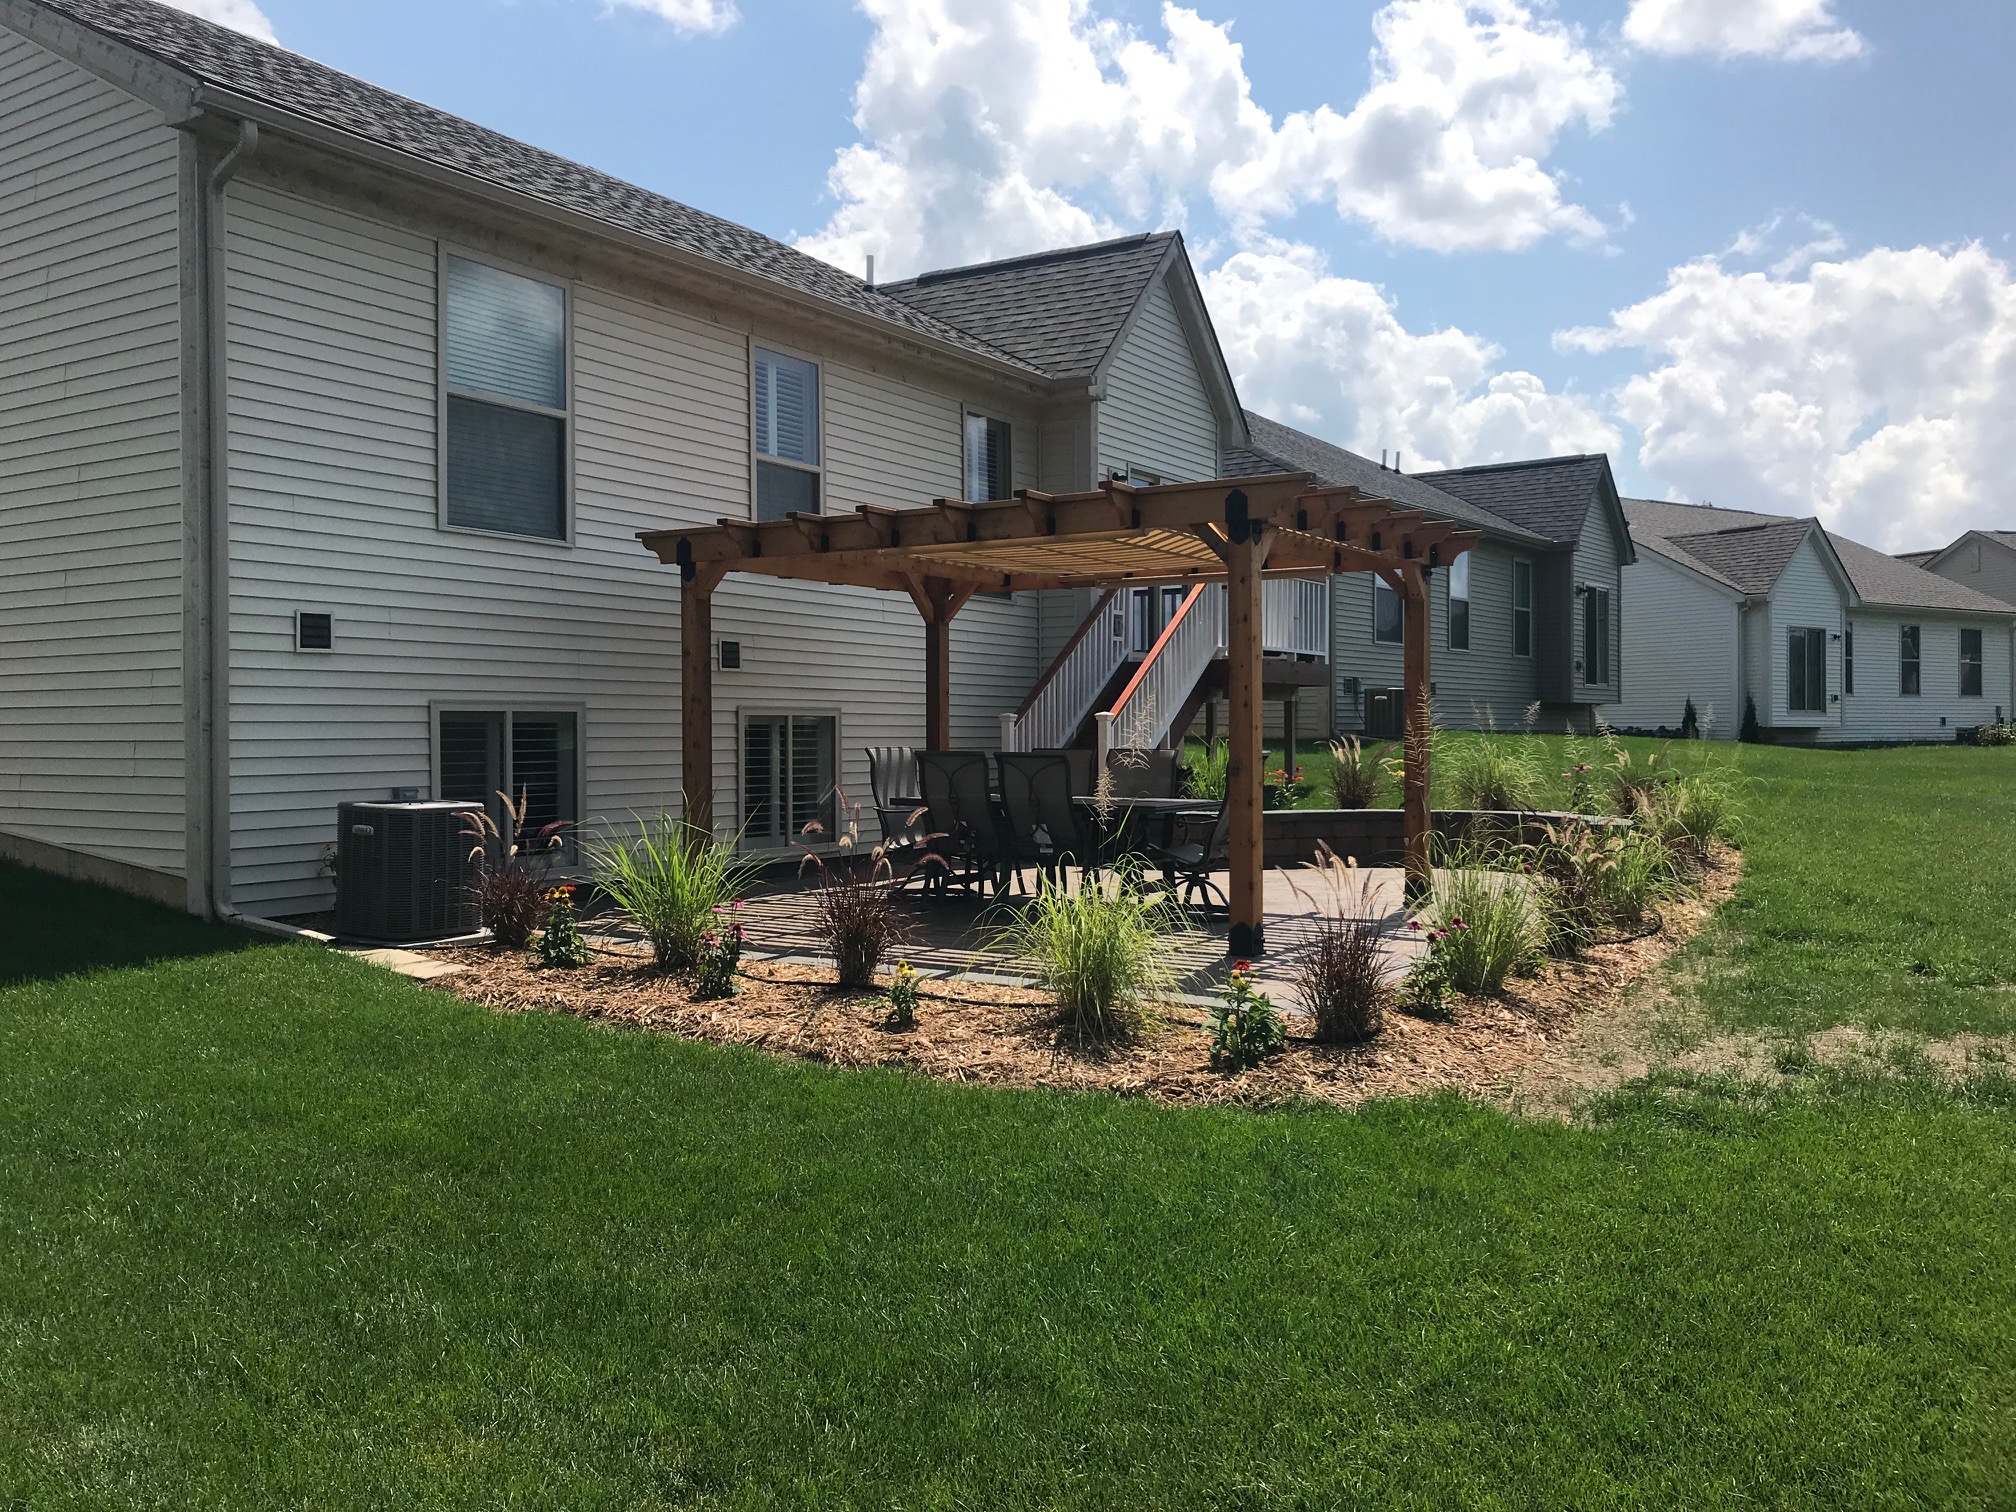 Project Spotlight: Patio, Pergola, and Landscaping finished.